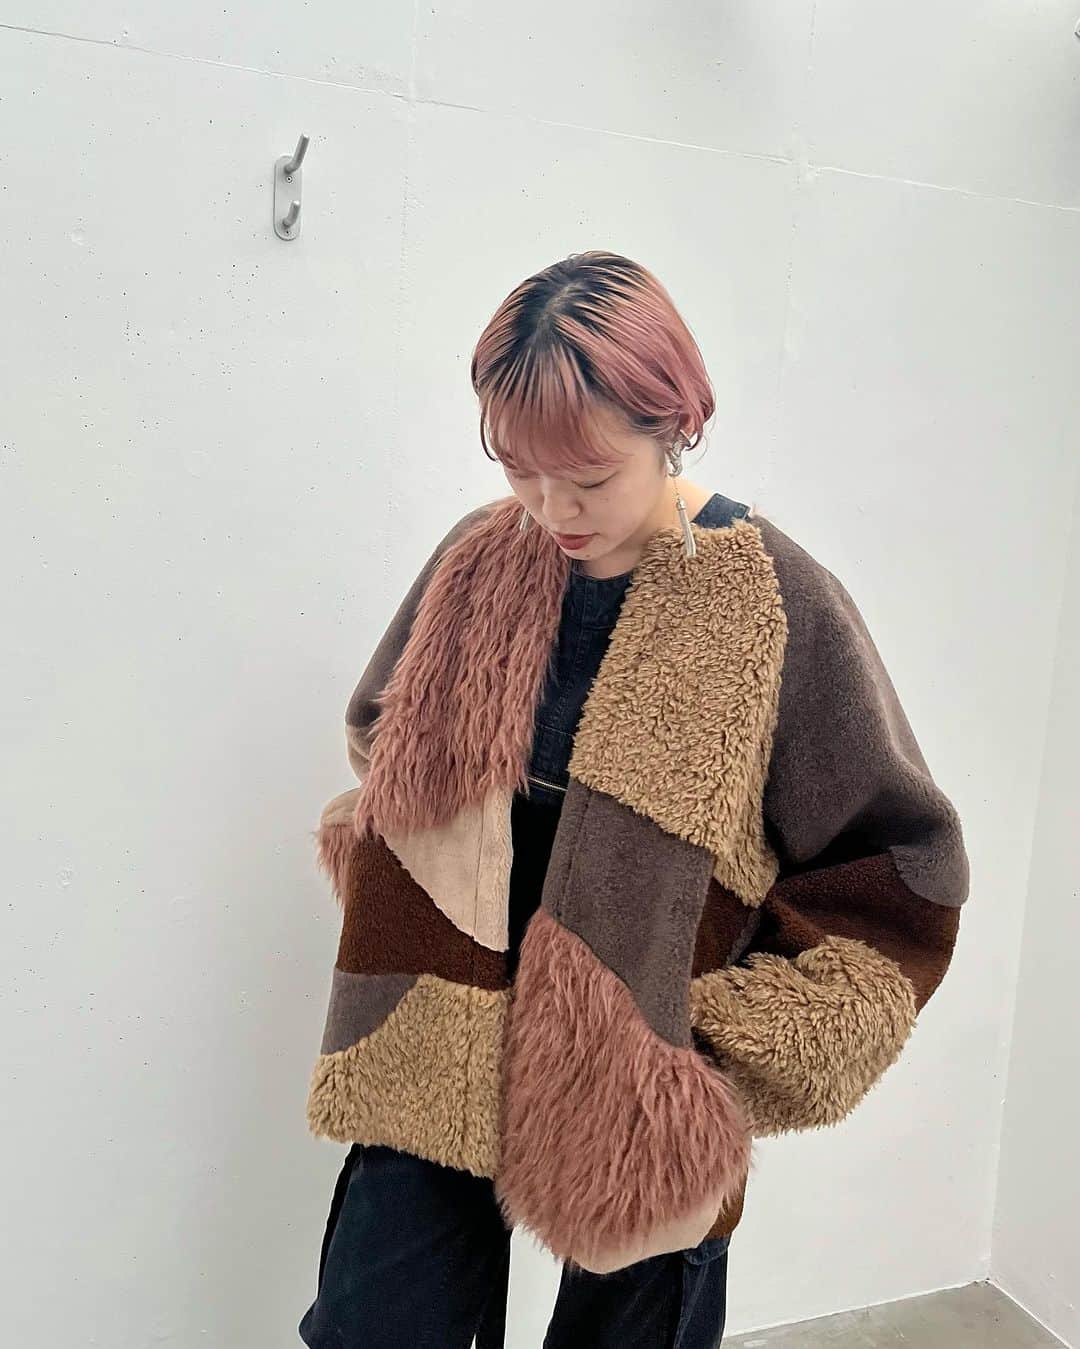 MIDWEST TOKYO WOMENのインスタグラム：「. NOUNLESS POPUP @_nounless 11.25(sat)-12.3(sun)  【outer】 quilting patchwork fake fur coat @_nounless brown,gray / size 1  【all in one】 ioanah @photocopieu black, white / size 36,38  【shoes】 side gore boots @elviozanon_jp black / size 35-39  @midwest_tw staff 160cm  ________ ________ ________ ________  MIDWEST TOKYO 東京都渋谷区神南1-6-1 ☎︎03-5428-3171 ✉︎tokyo_w@midwest.jp  月〜土 12:00〜20:00 日・祝 11:00〜19:00  商品に関してのご質問、その他ございましたら お気軽にコメント、DMください。」